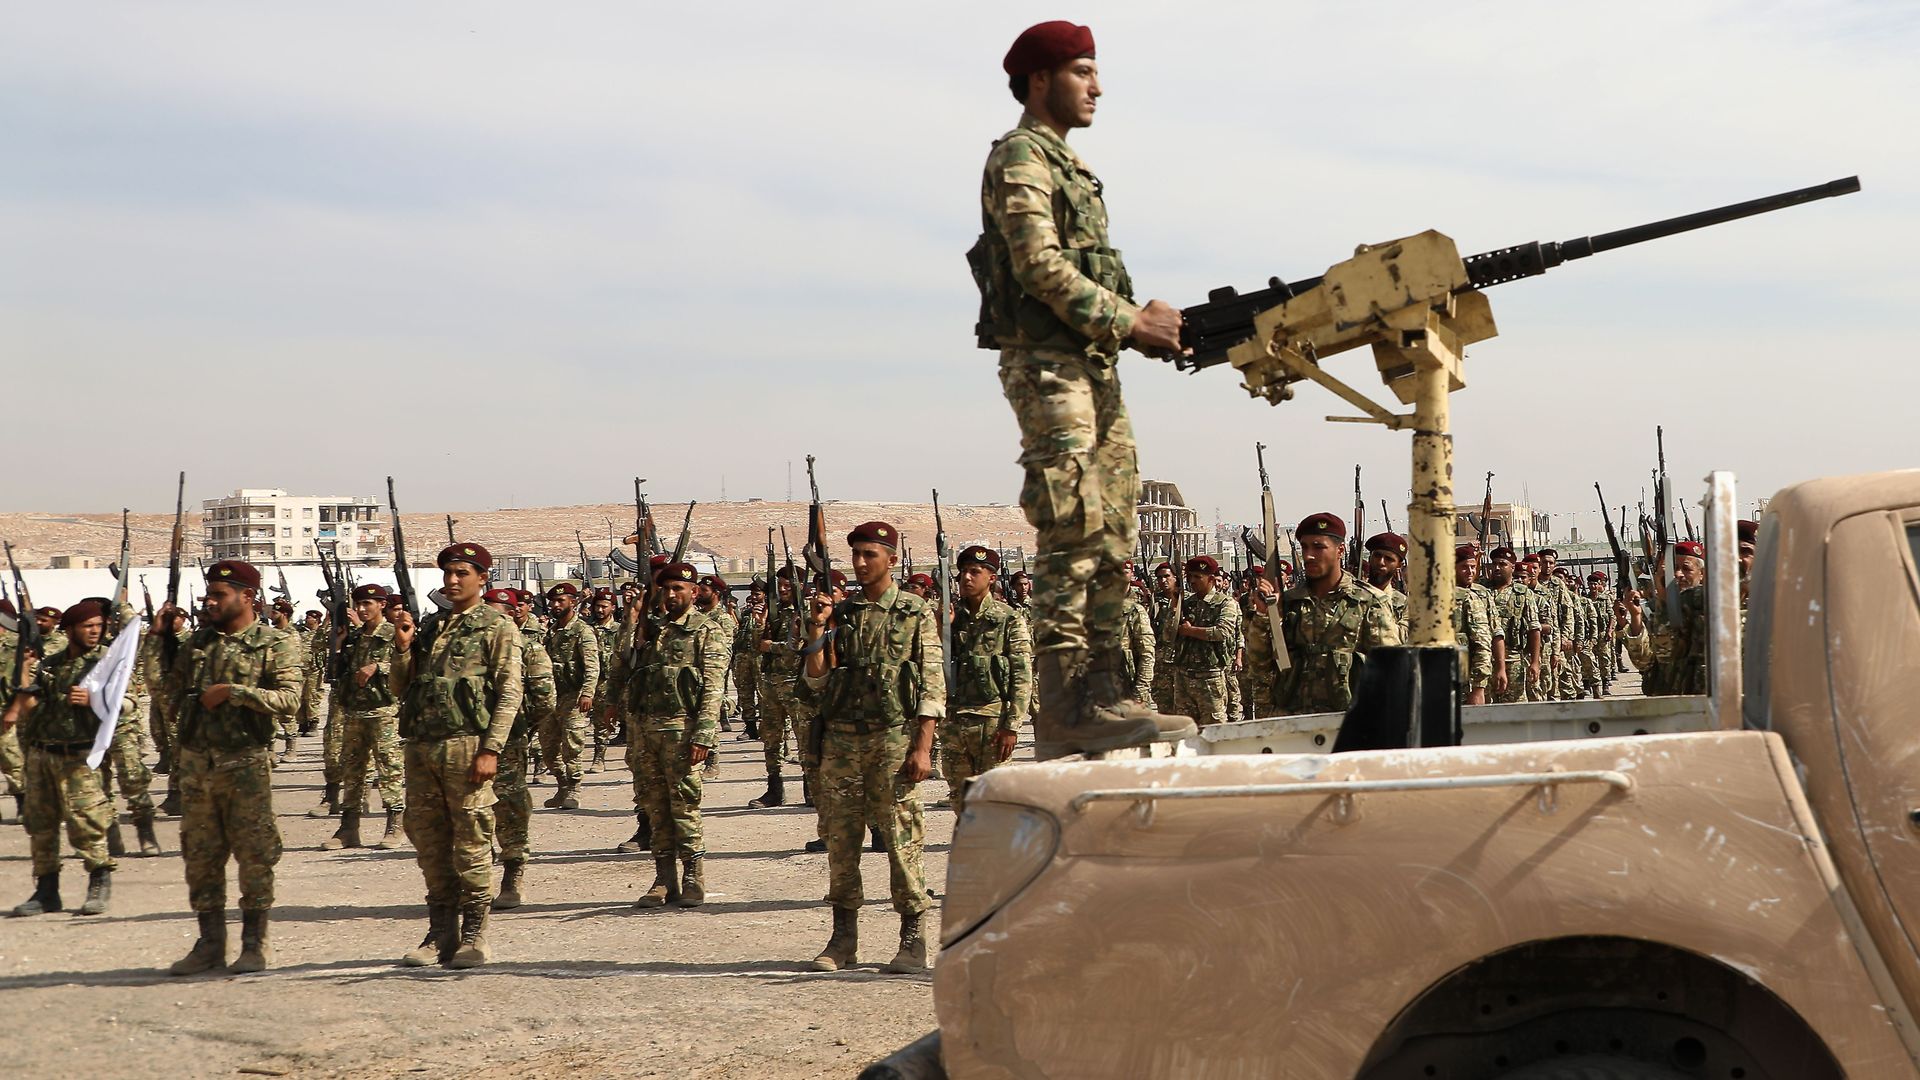 In this image, a soldier stands in the back of a truck while holding onto a stationary machine gun while rows of soldiers stand behind him 